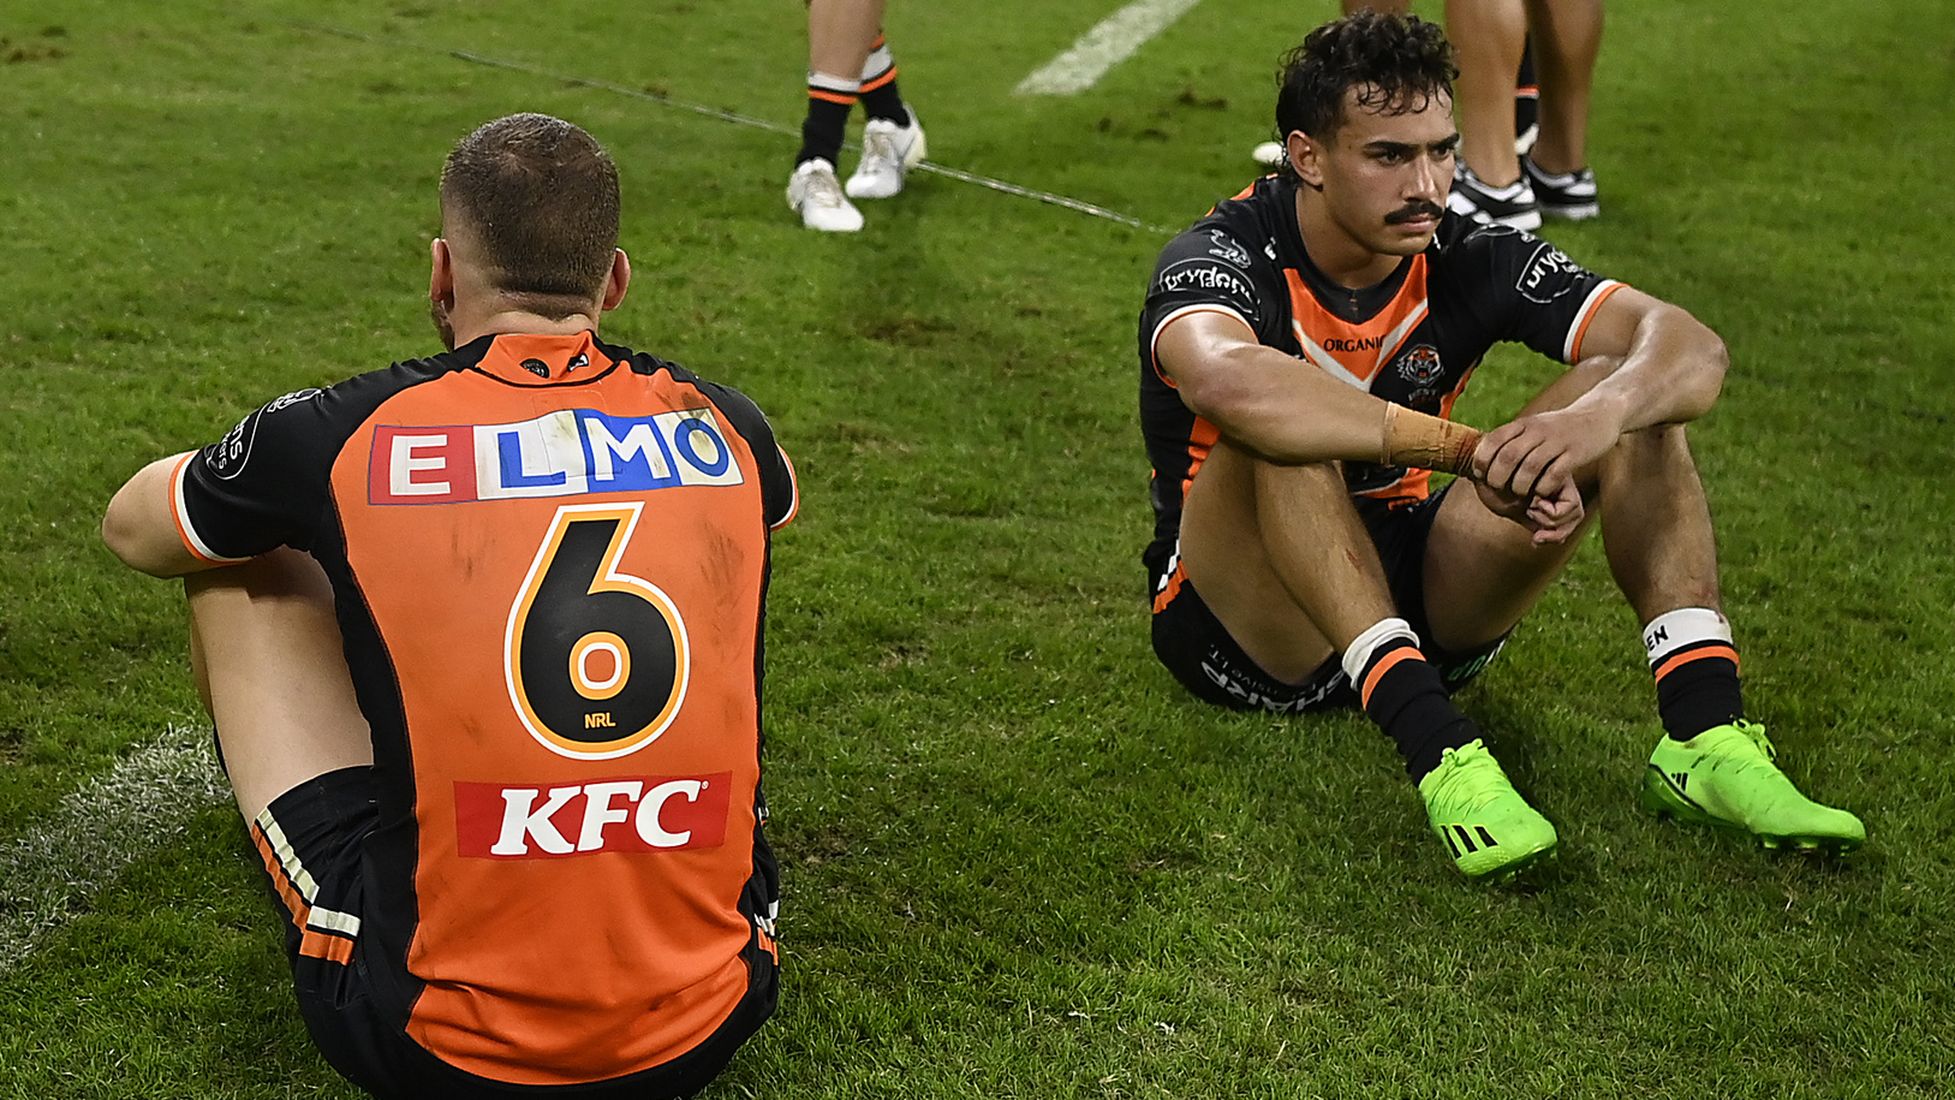 NRL confirms Wests Tigers robbed by incorrect Bunker decision in loss to Cowboys